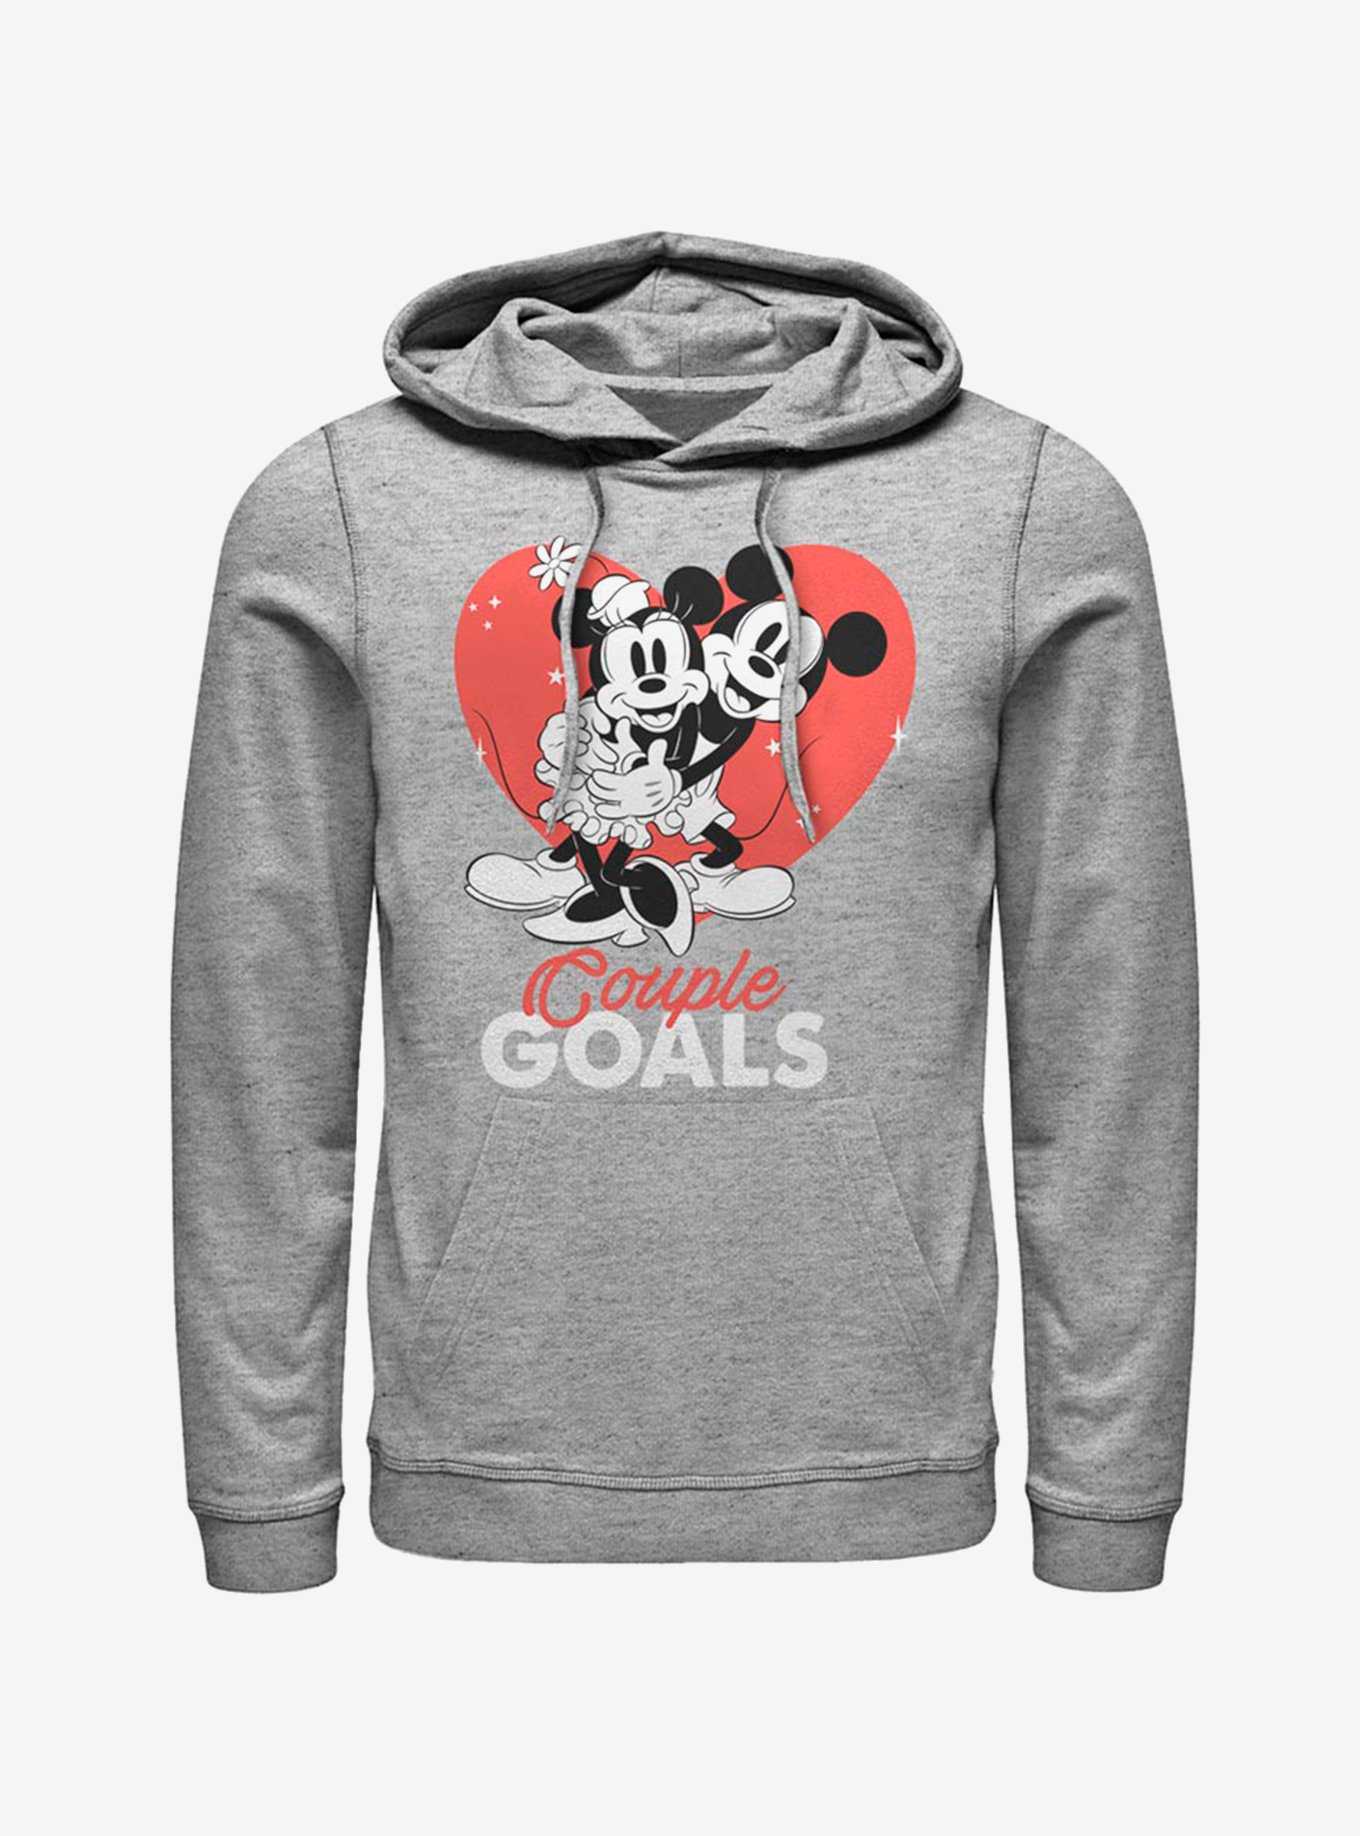 Disney Mickey Mouse & Minnie Mouse Couple Goals Hoodie, , hi-res